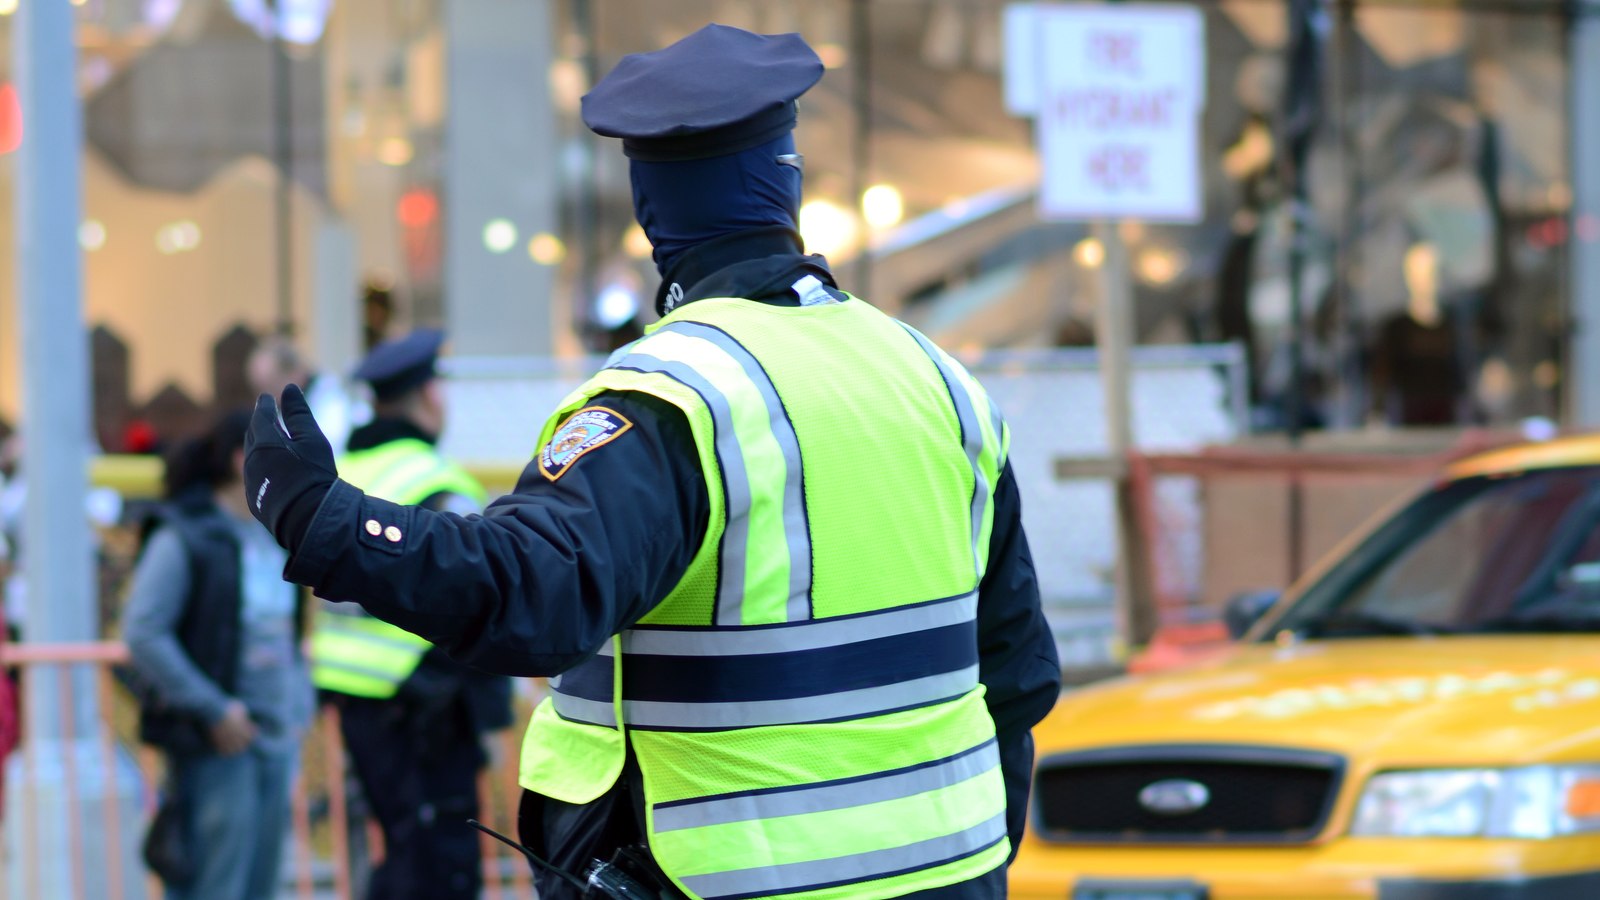 Minimizing safety risks for police directing traffic